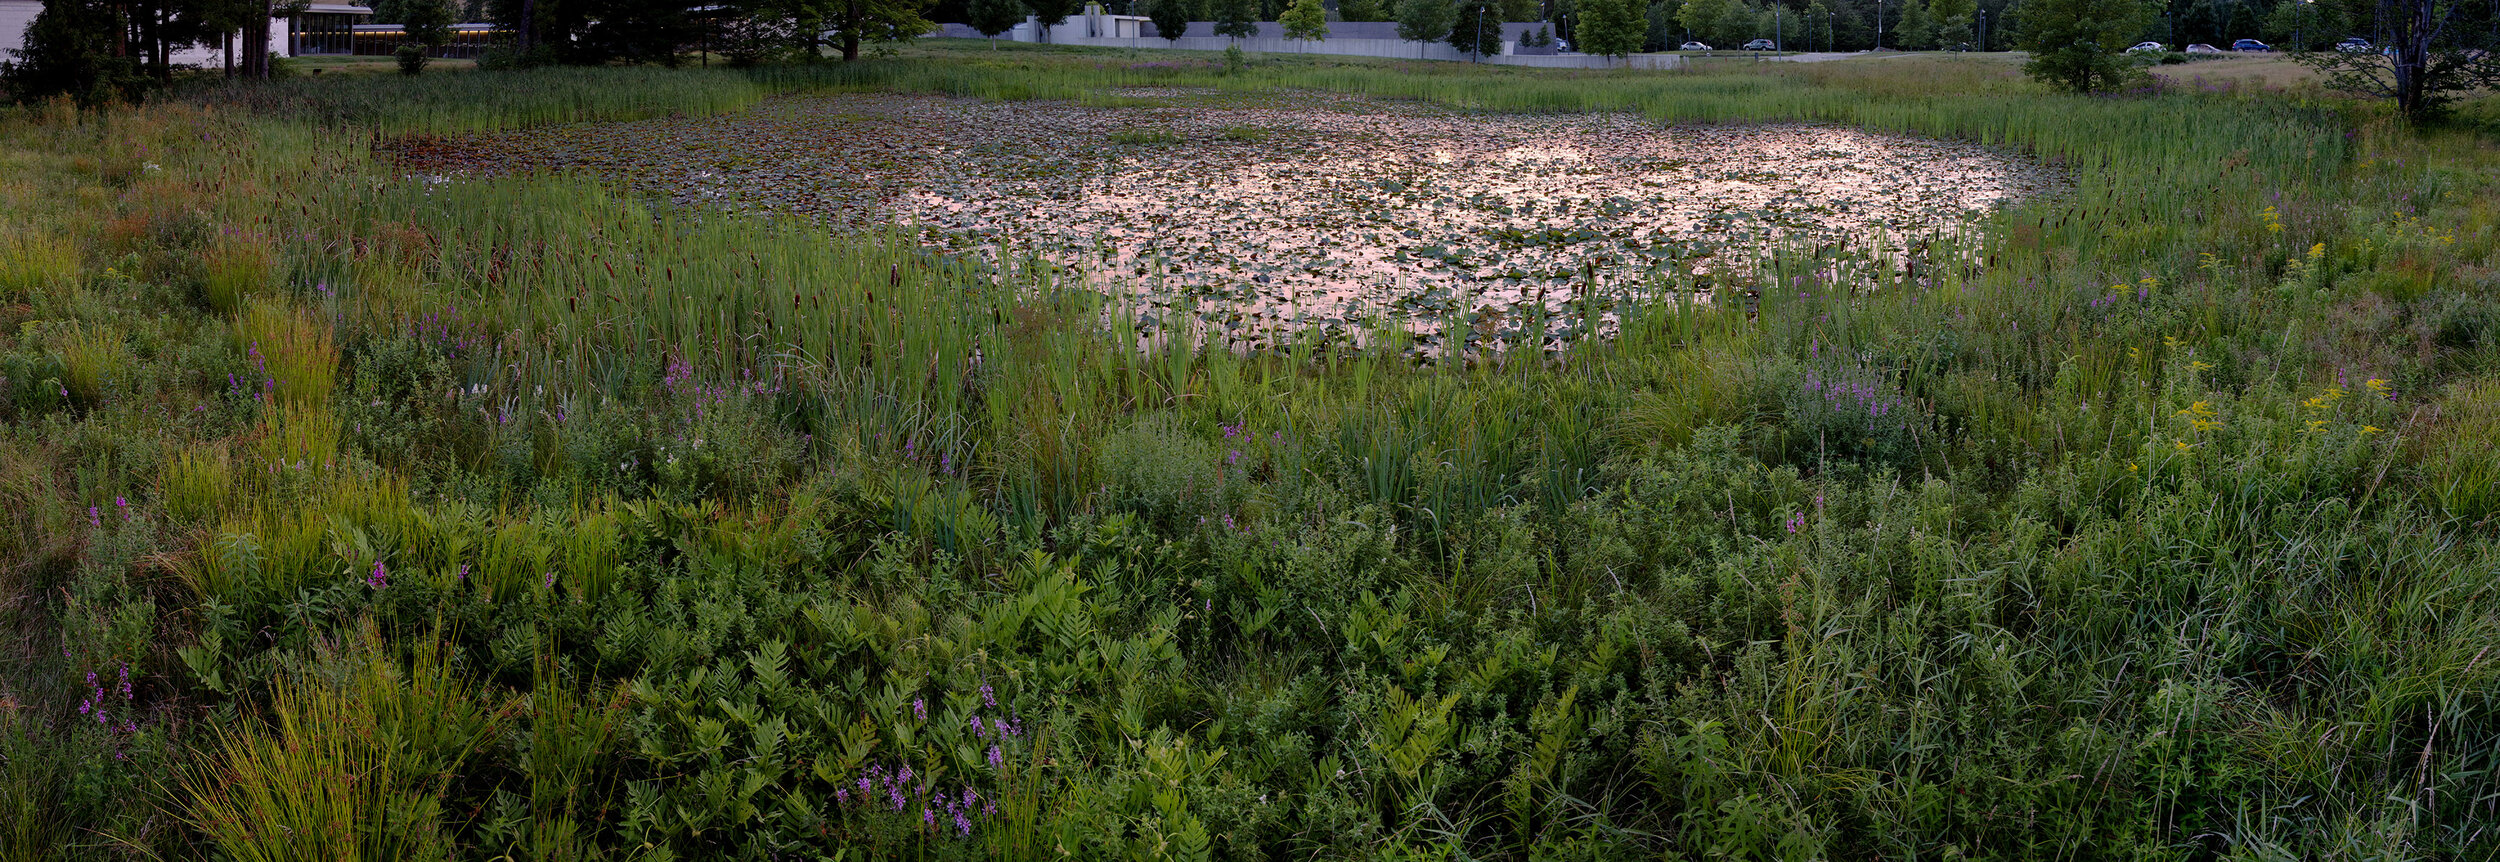 Stone Hill Lily Pond #10, Summer Evening